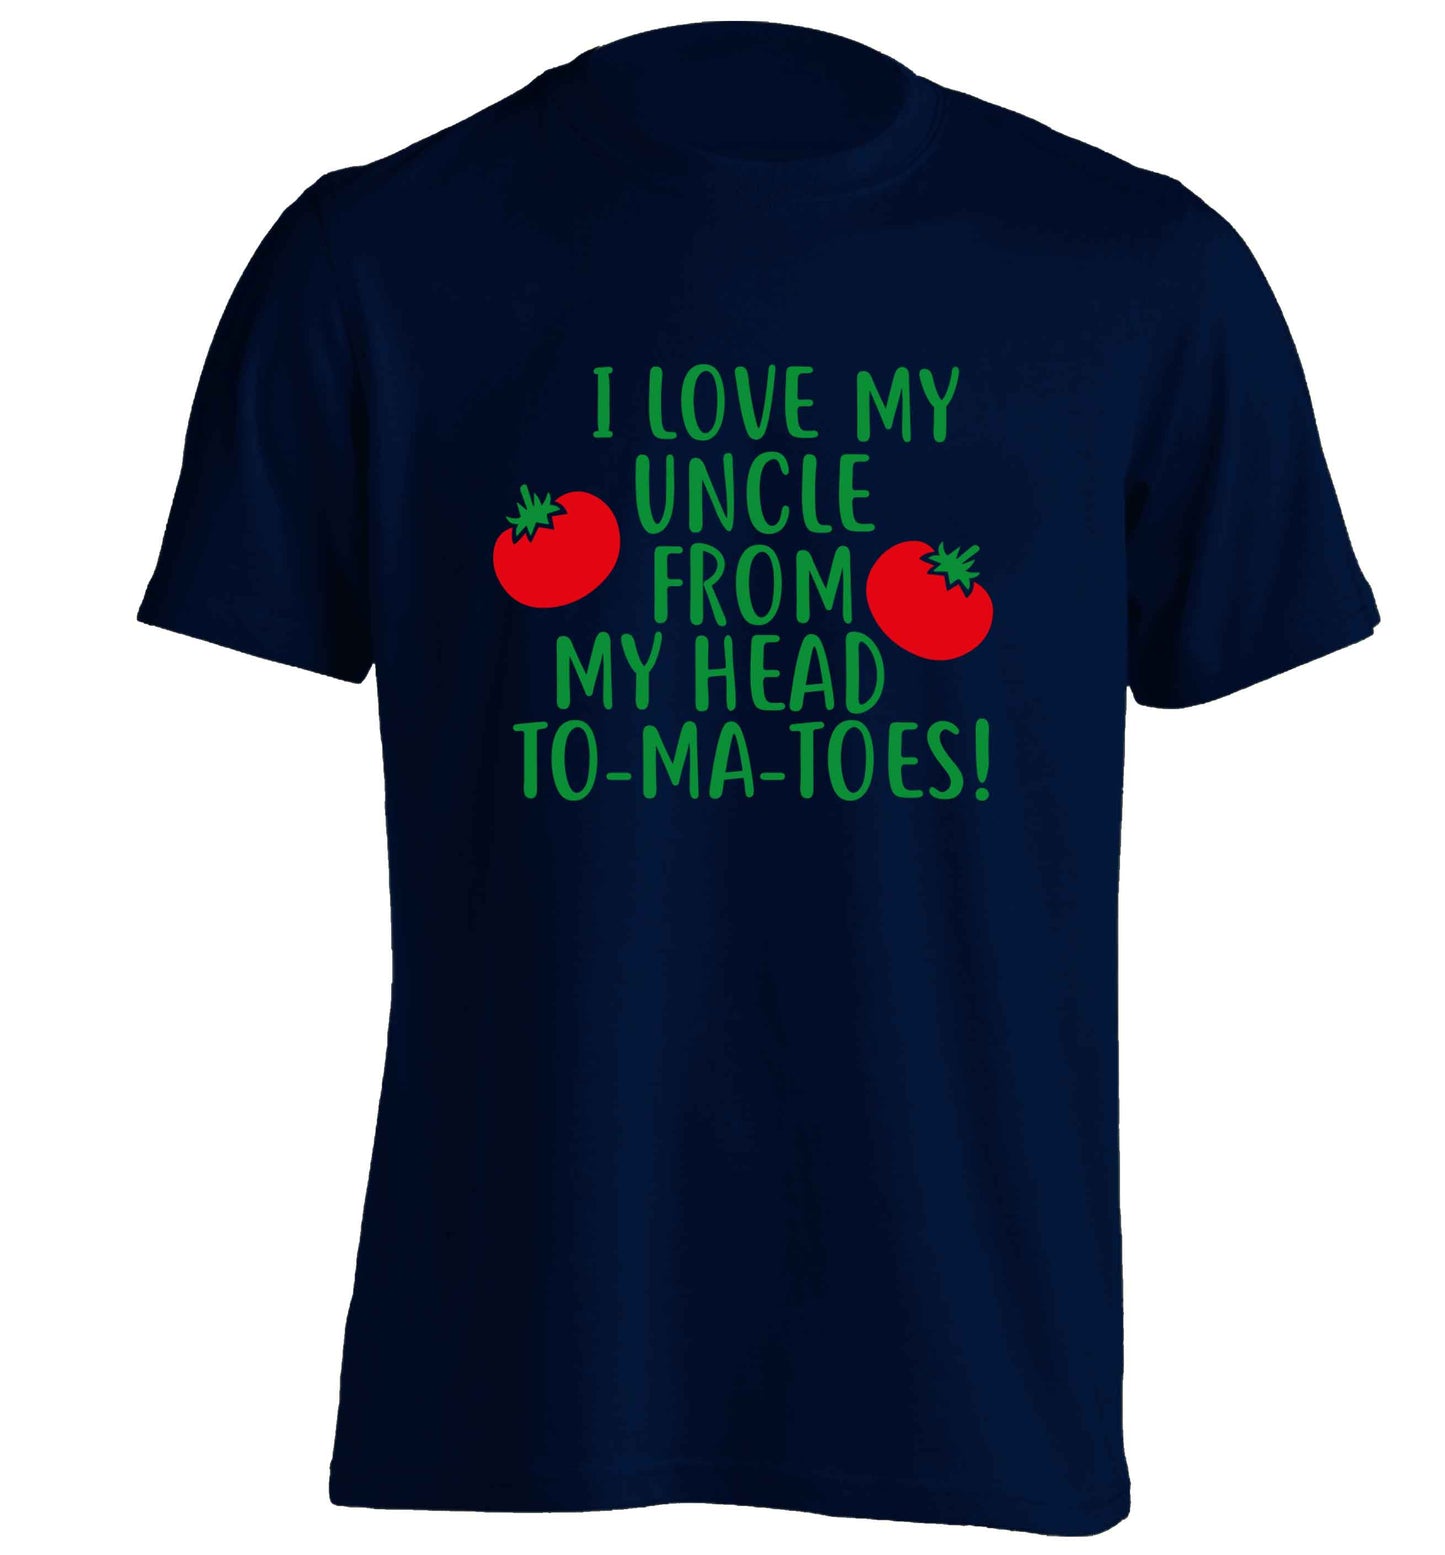 I love my uncle from my head To-Ma-Toes adults unisex navy Tshirt 2XL